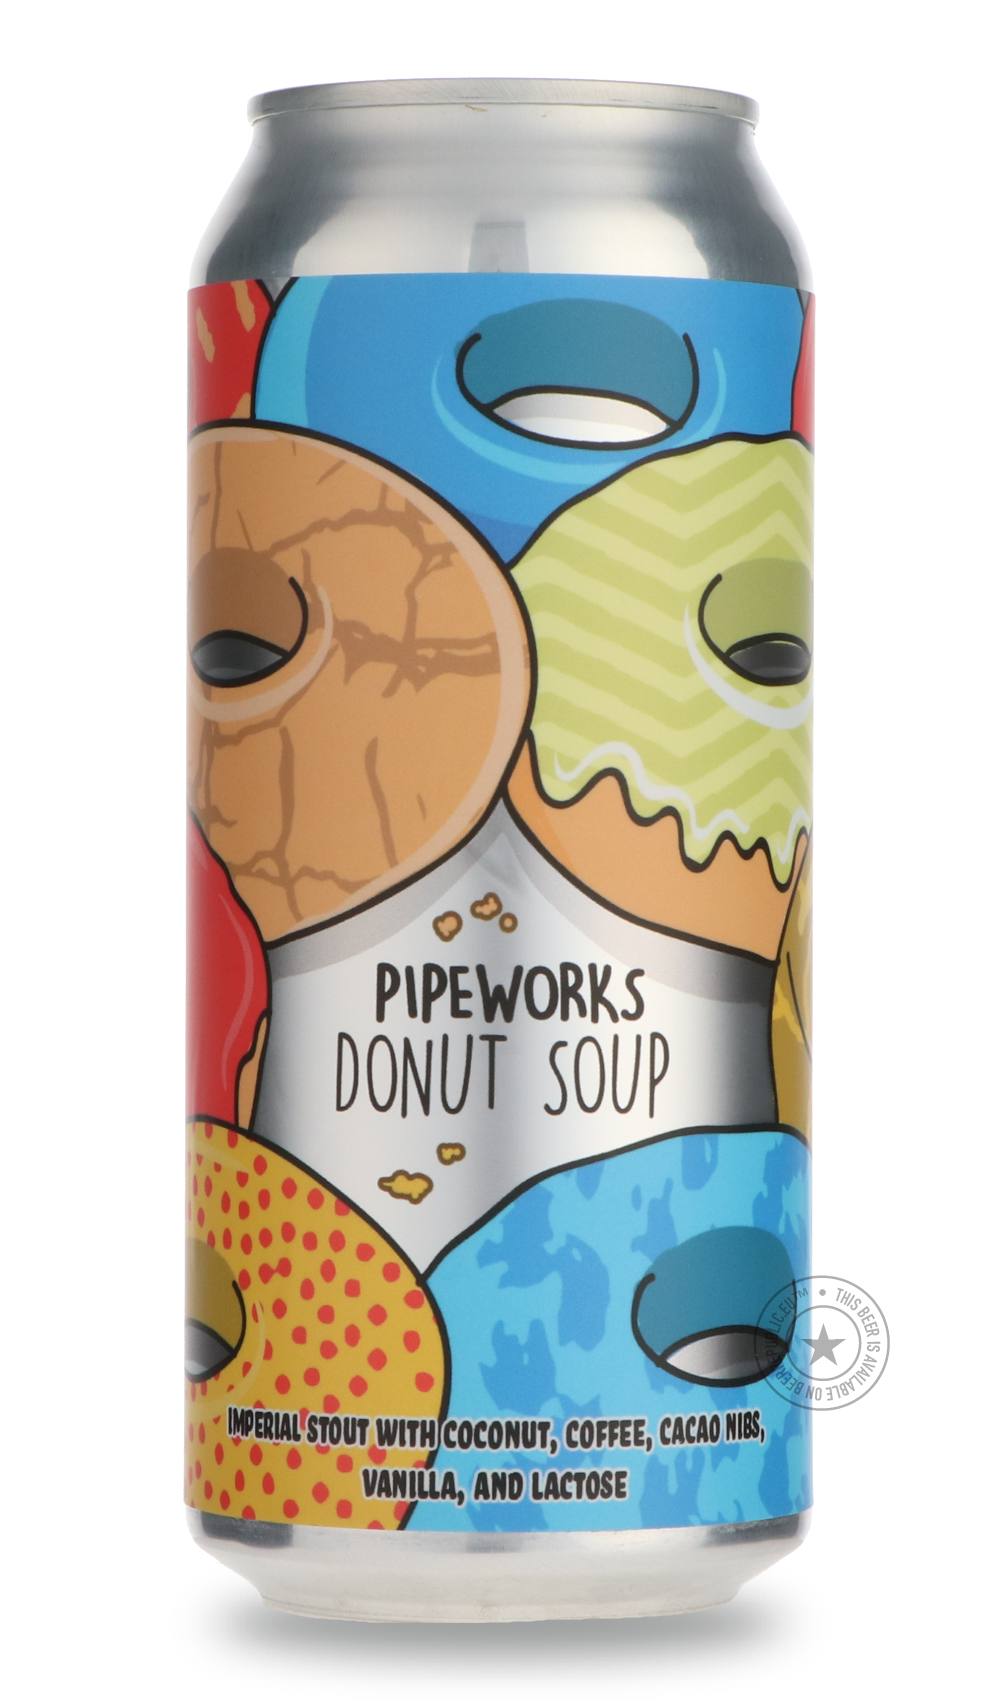 -Pipeworks- Donut Soup-Stout & Porter- Only @ Beer Republic - The best online beer store for American & Canadian craft beer - Buy beer online from the USA and Canada - Bier online kopen - Amerikaans bier kopen - Craft beer store - Craft beer kopen - Amerikanisch bier kaufen - Bier online kaufen - Acheter biere online - IPA - Stout - Porter - New England IPA - Hazy IPA - Imperial Stout - Barrel Aged - Barrel Aged Imperial Stout - Brown - Dark beer - Blond - Blonde - Pilsner - Lager - Wheat - Weizen - Amber -